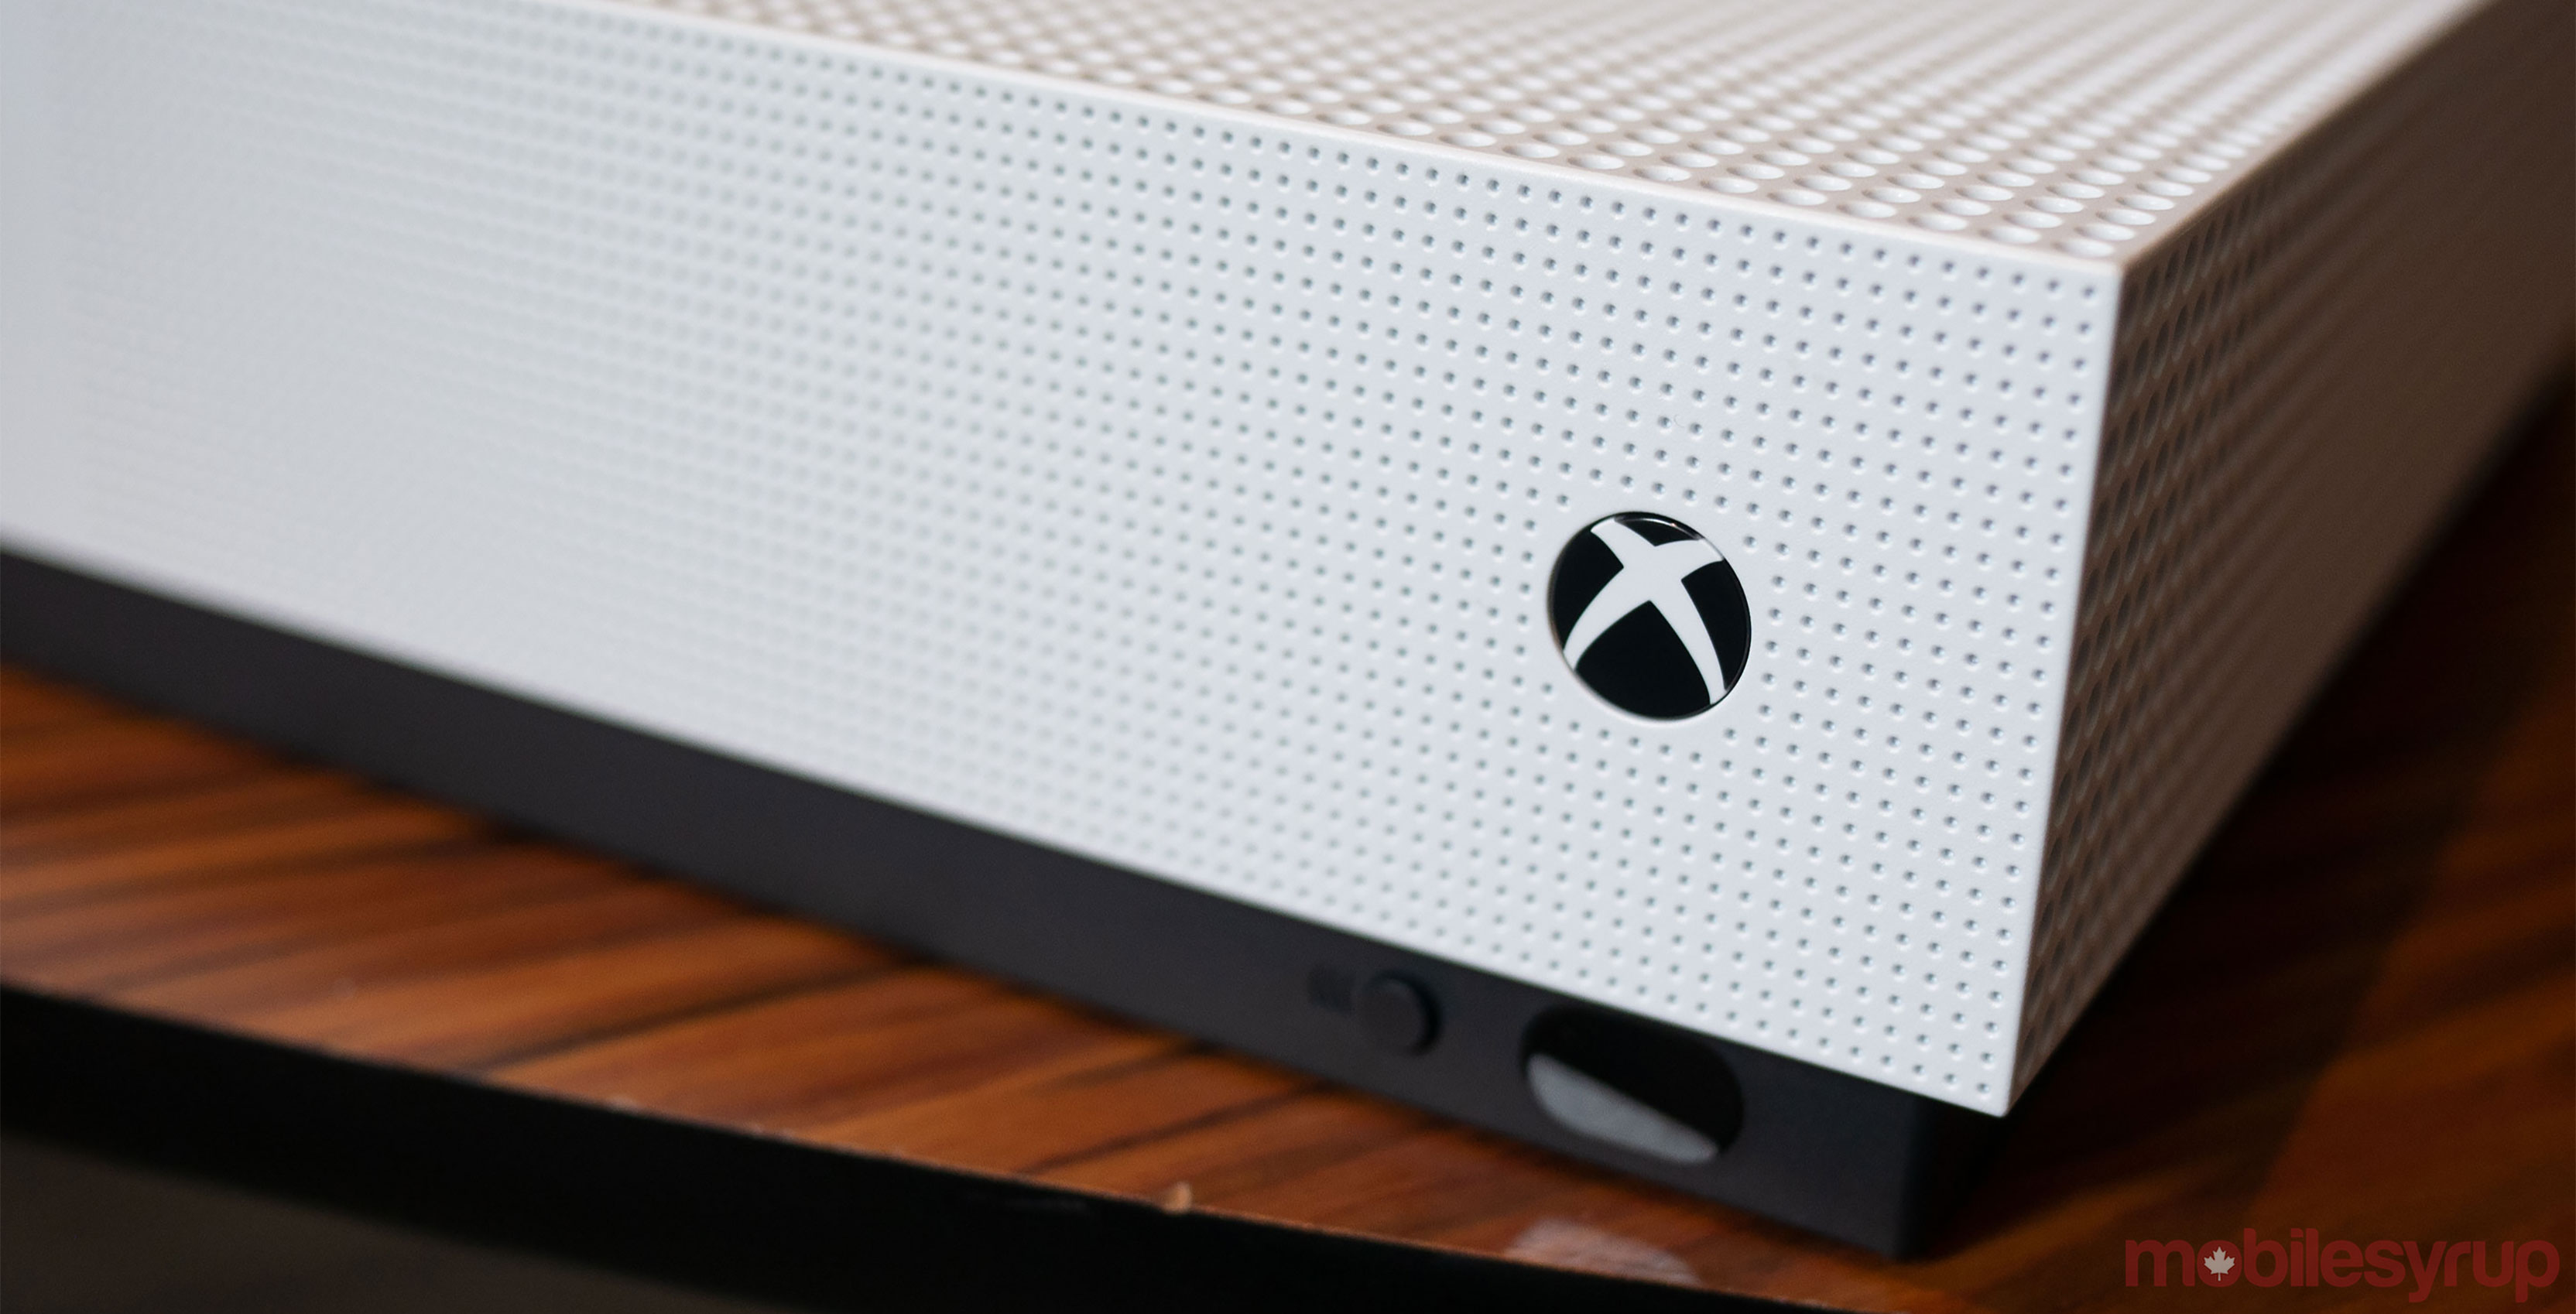 xbox one s is for sale